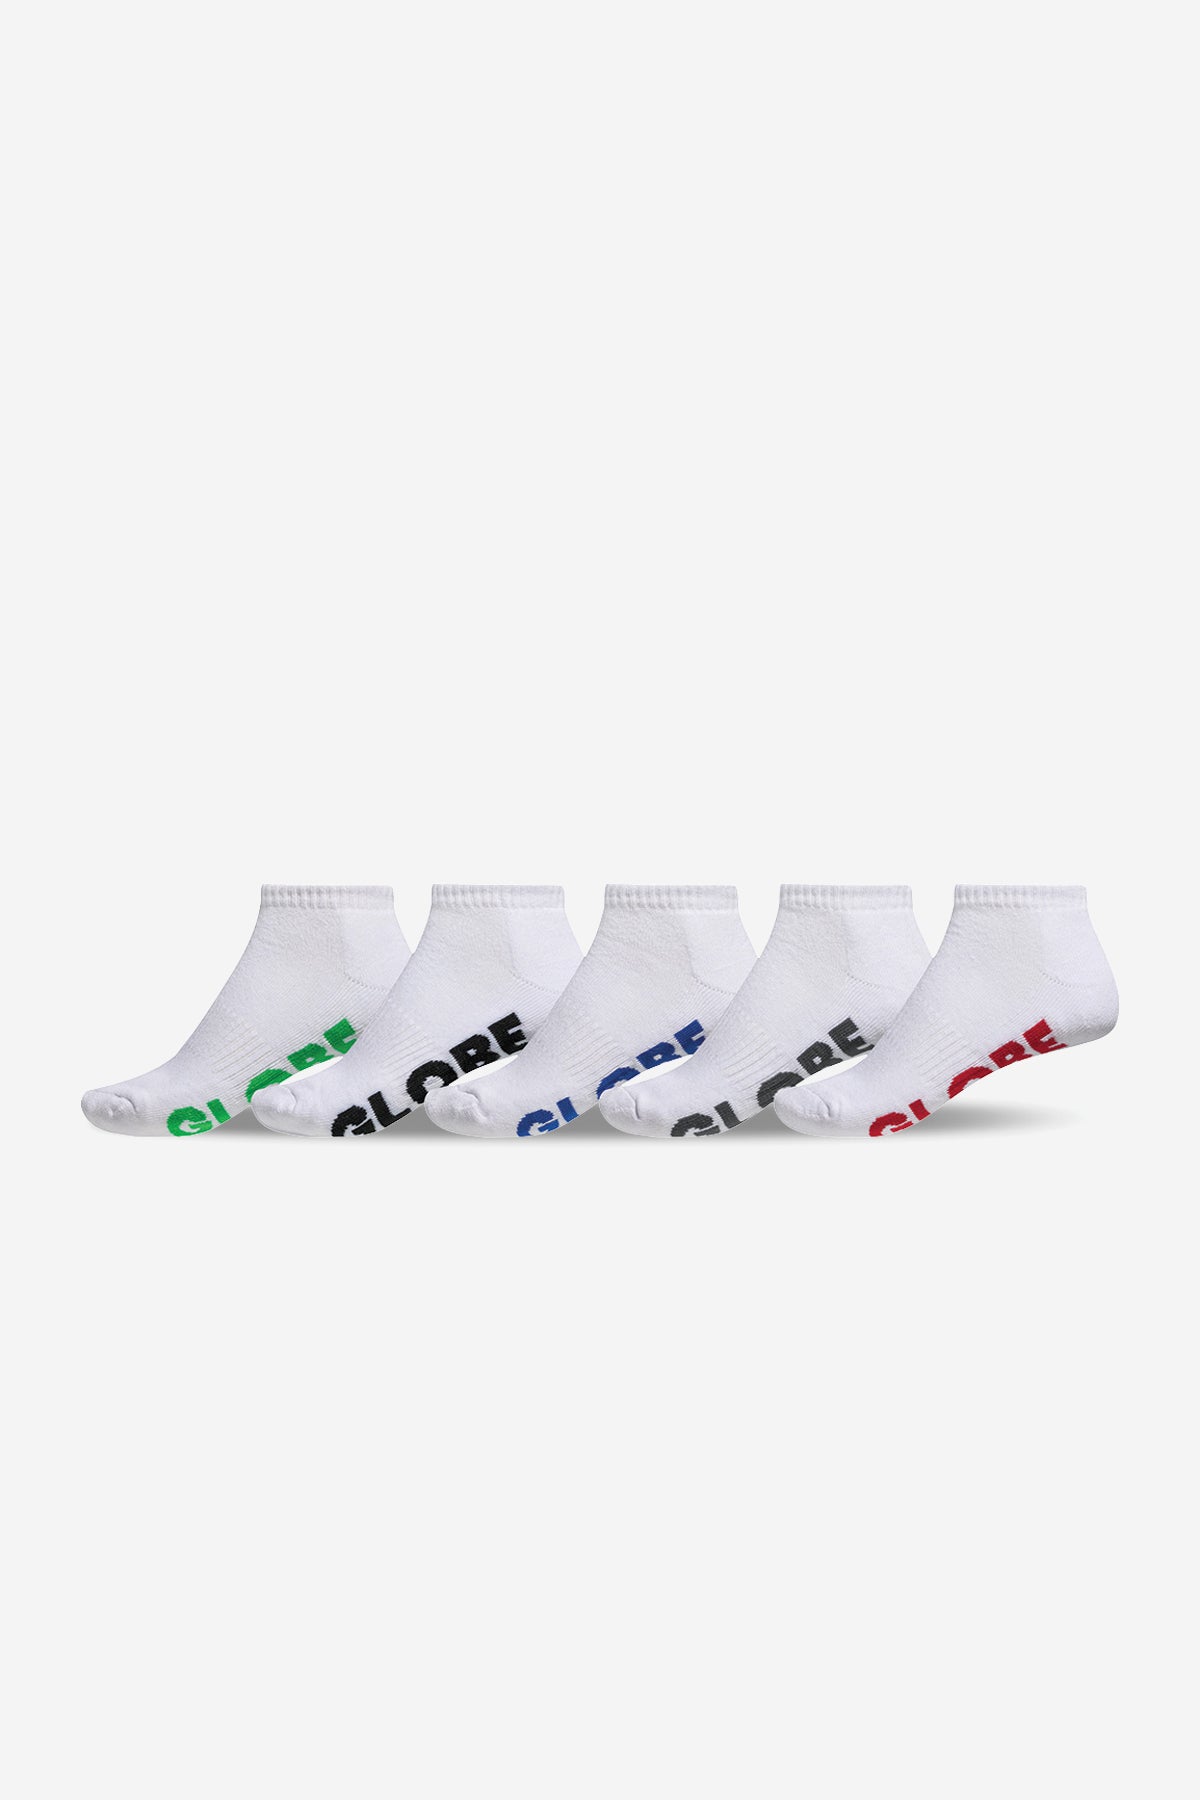 logo color options of Stealth Ankle Sock 5pk in white